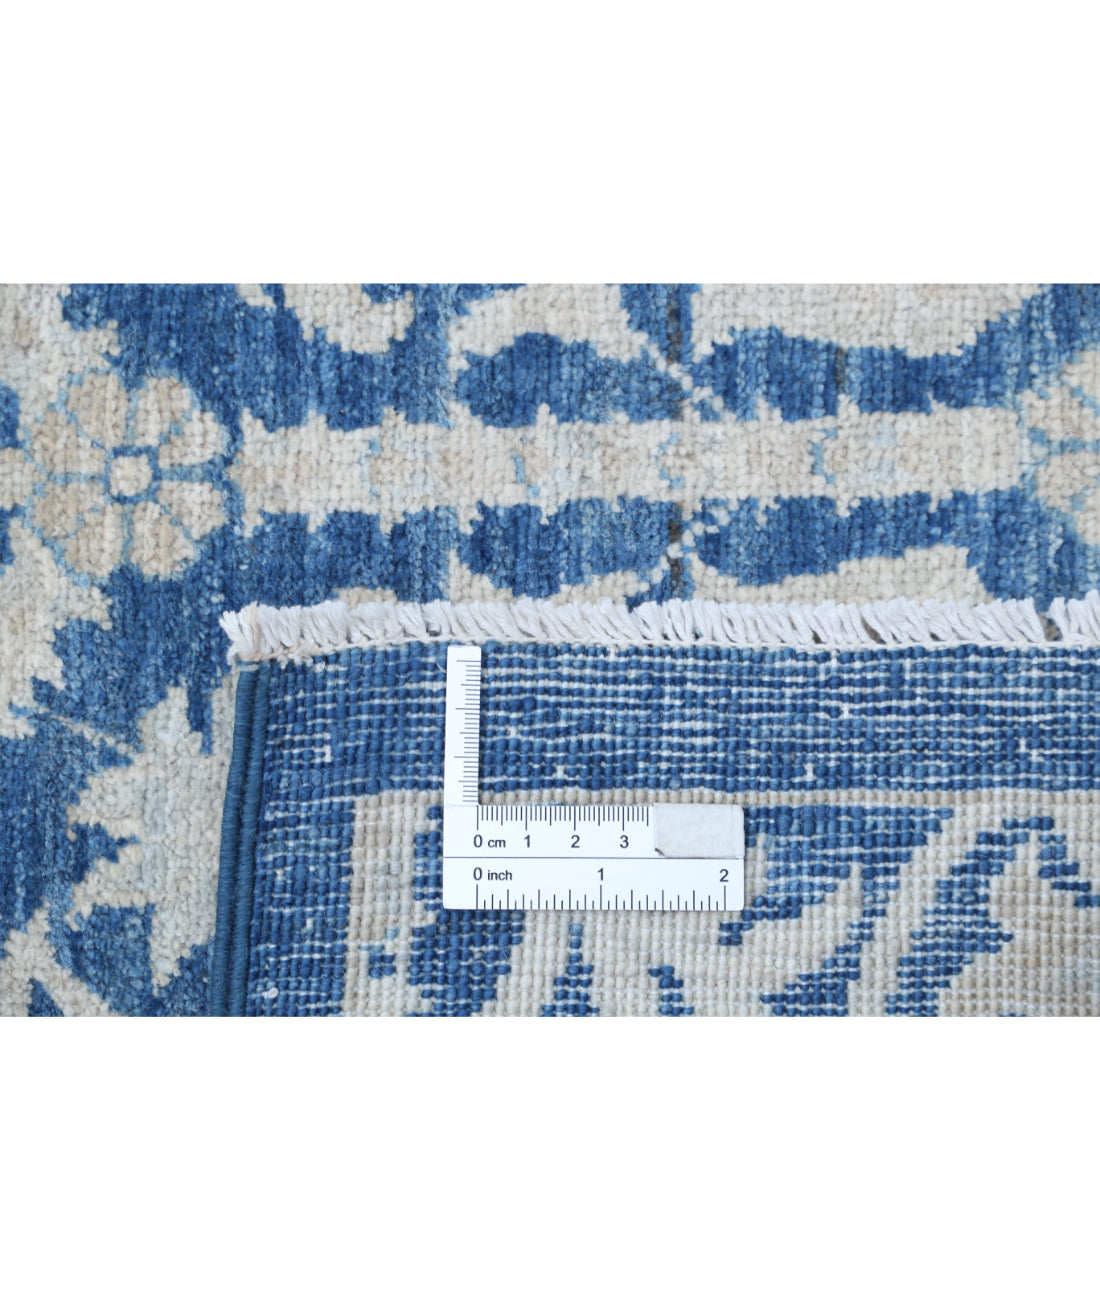 Hand Knotted Art & Craft Wool Rug - 8'0'' x 9'9'' 8'0'' x 9'9'' (240 X 293) / Blue / Ivory